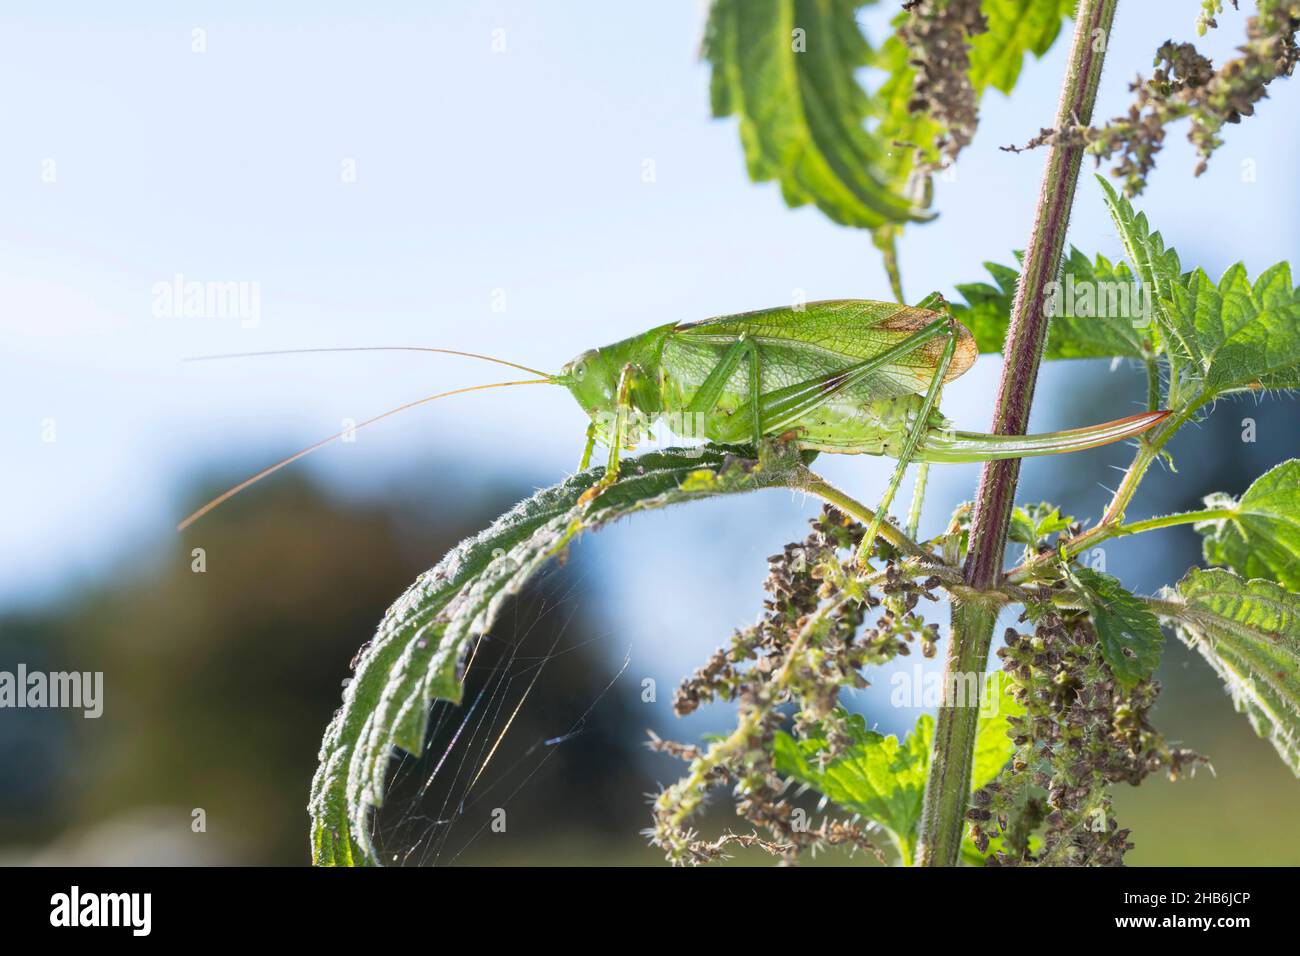 Twitching green bushcricket, Twitching green bush cricket, Twitching green bush-cricket (Tettigonia cantans), female with ovipositor, Germany Stock Photo